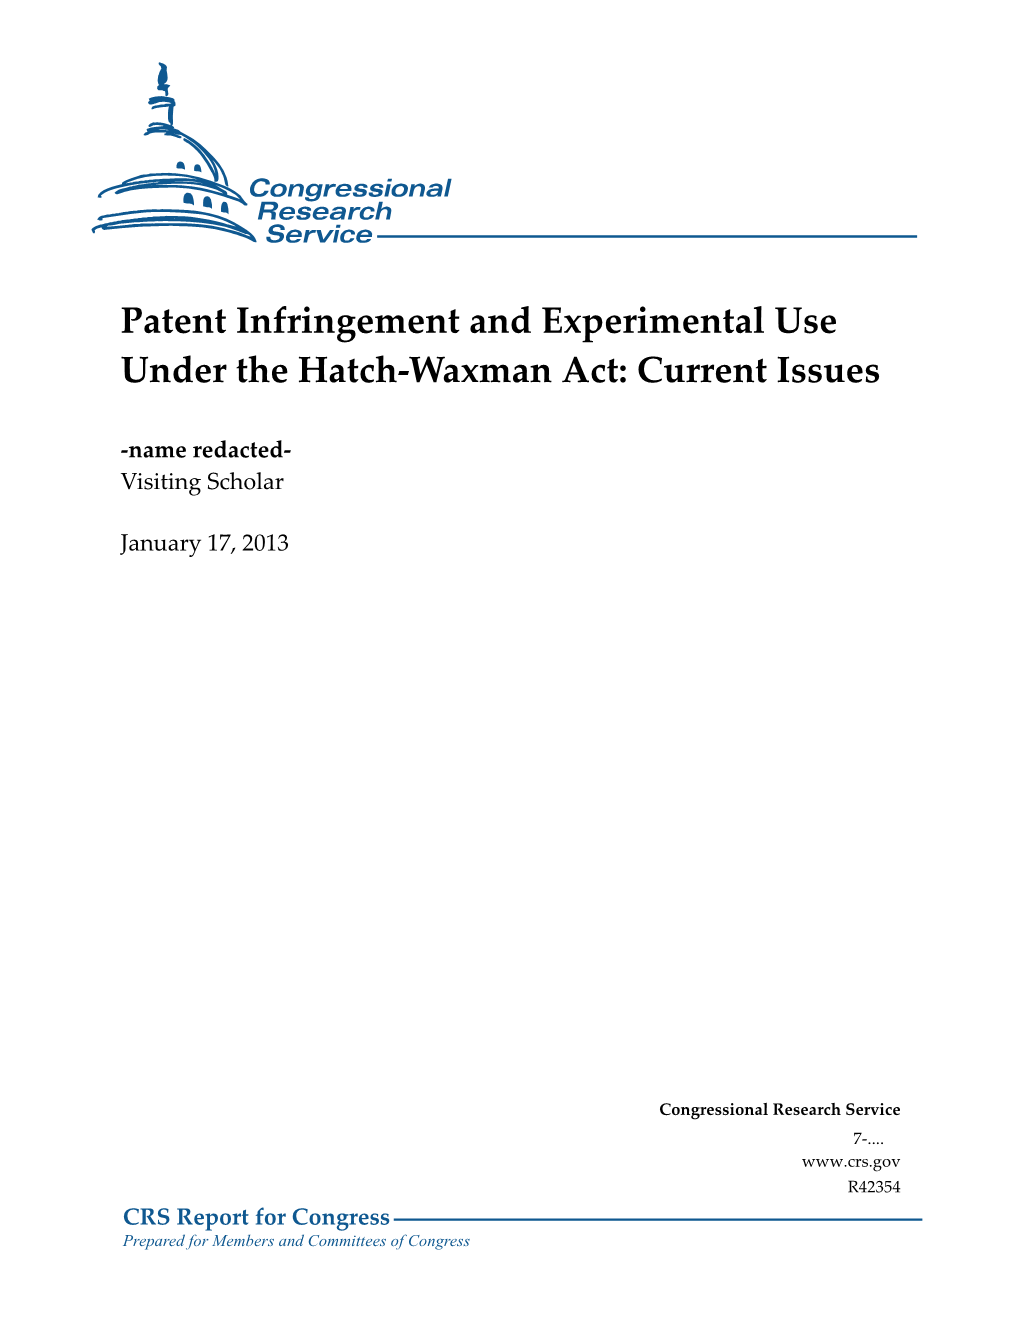 Patent Infringement and Experimental Use Under the Hatch-Waxman Act: Current Issues